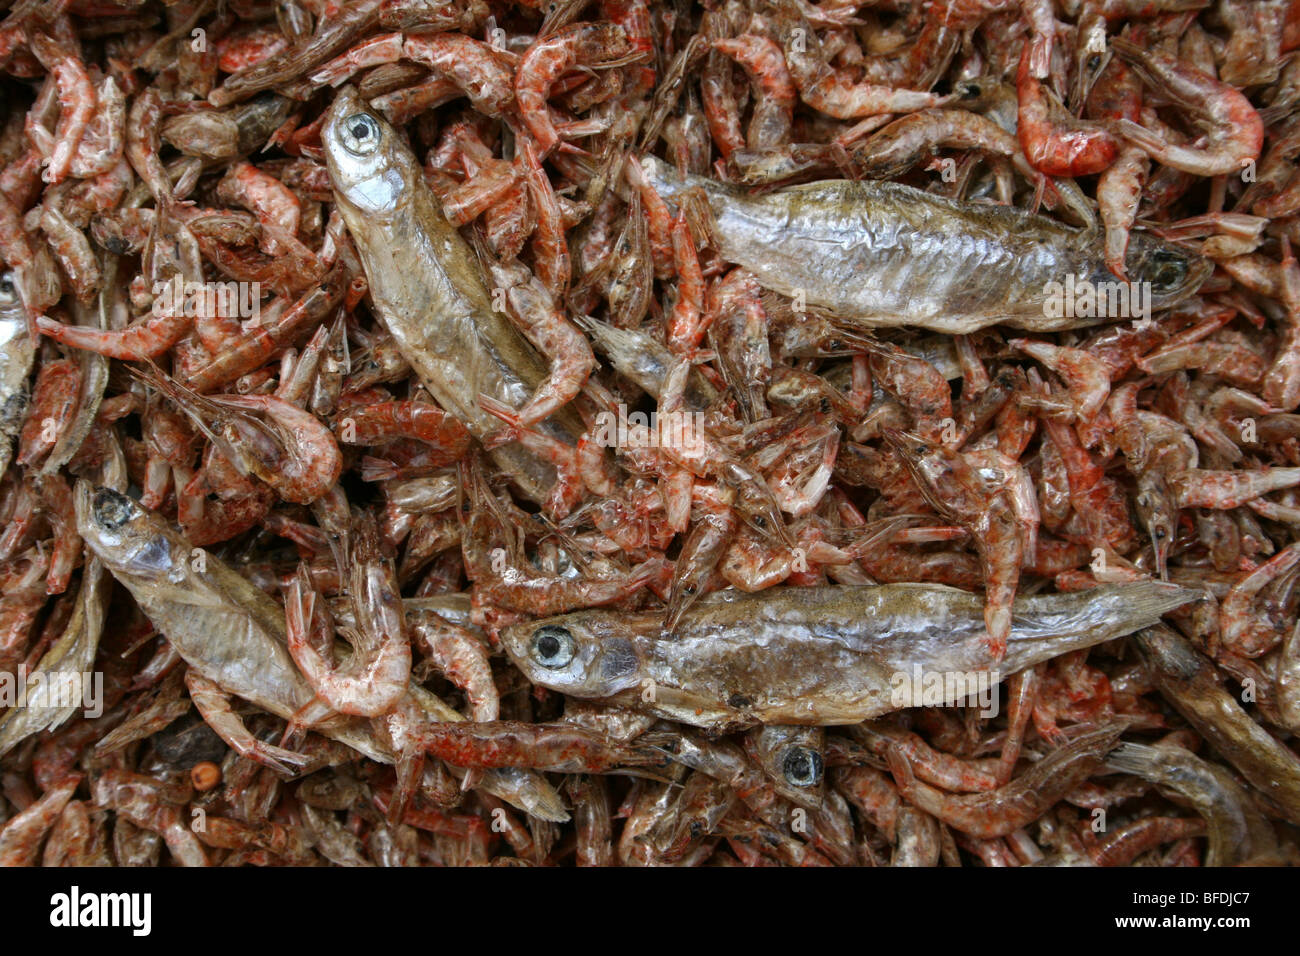 Dried Fish And Shrimps For Sale In Arusha's Central Market, Tanzania Stock Photo